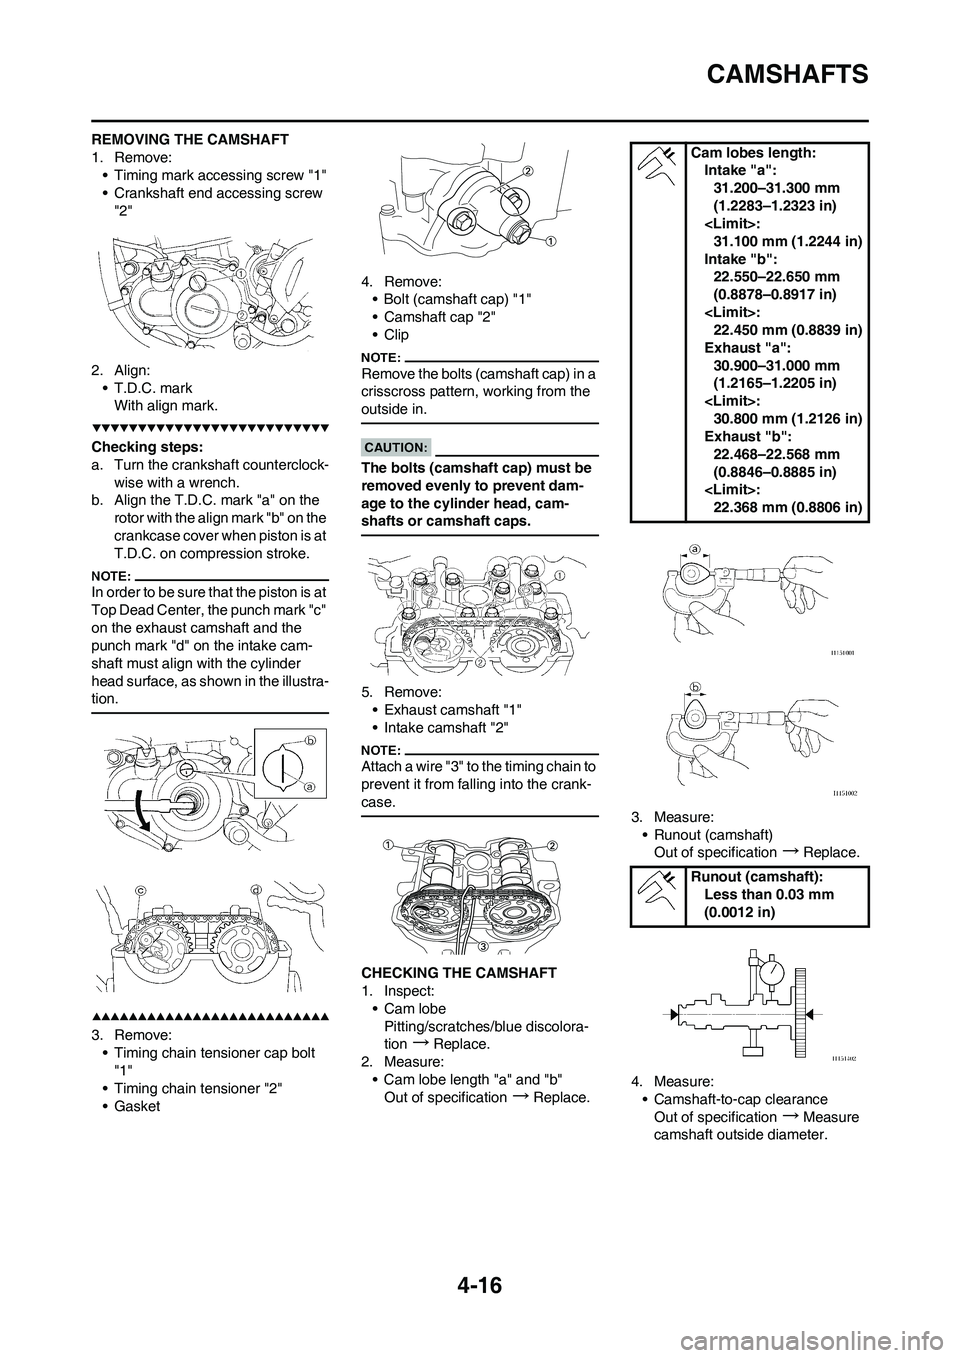 YAMAHA YZ450F 2008 User Guide 4-16
CAMSHAFTS
REMOVING THE CAMSHAFT
1. Remove:
• Timing mark accessing screw "1"
• Crankshaft end accessing screw 
"2"
2. Align:
• T.D.C. mark
With align mark.
Checking steps:
a. Turn the crank